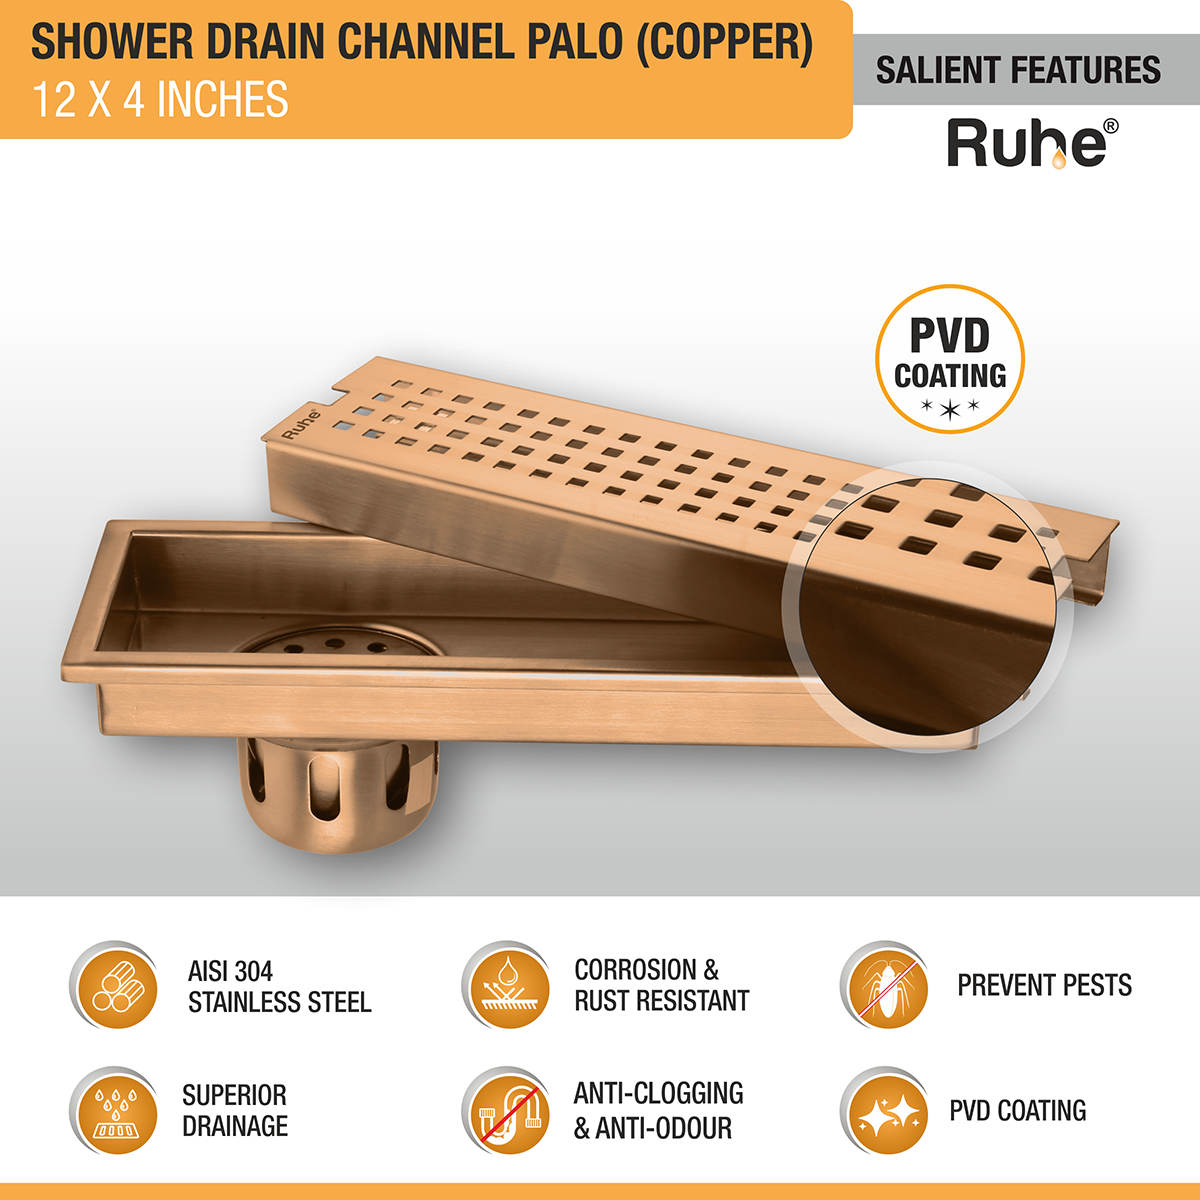 Palo Shower Drain Channel (12 x 4 Inches) ROSE GOLD/ANTIQUE COPPER features